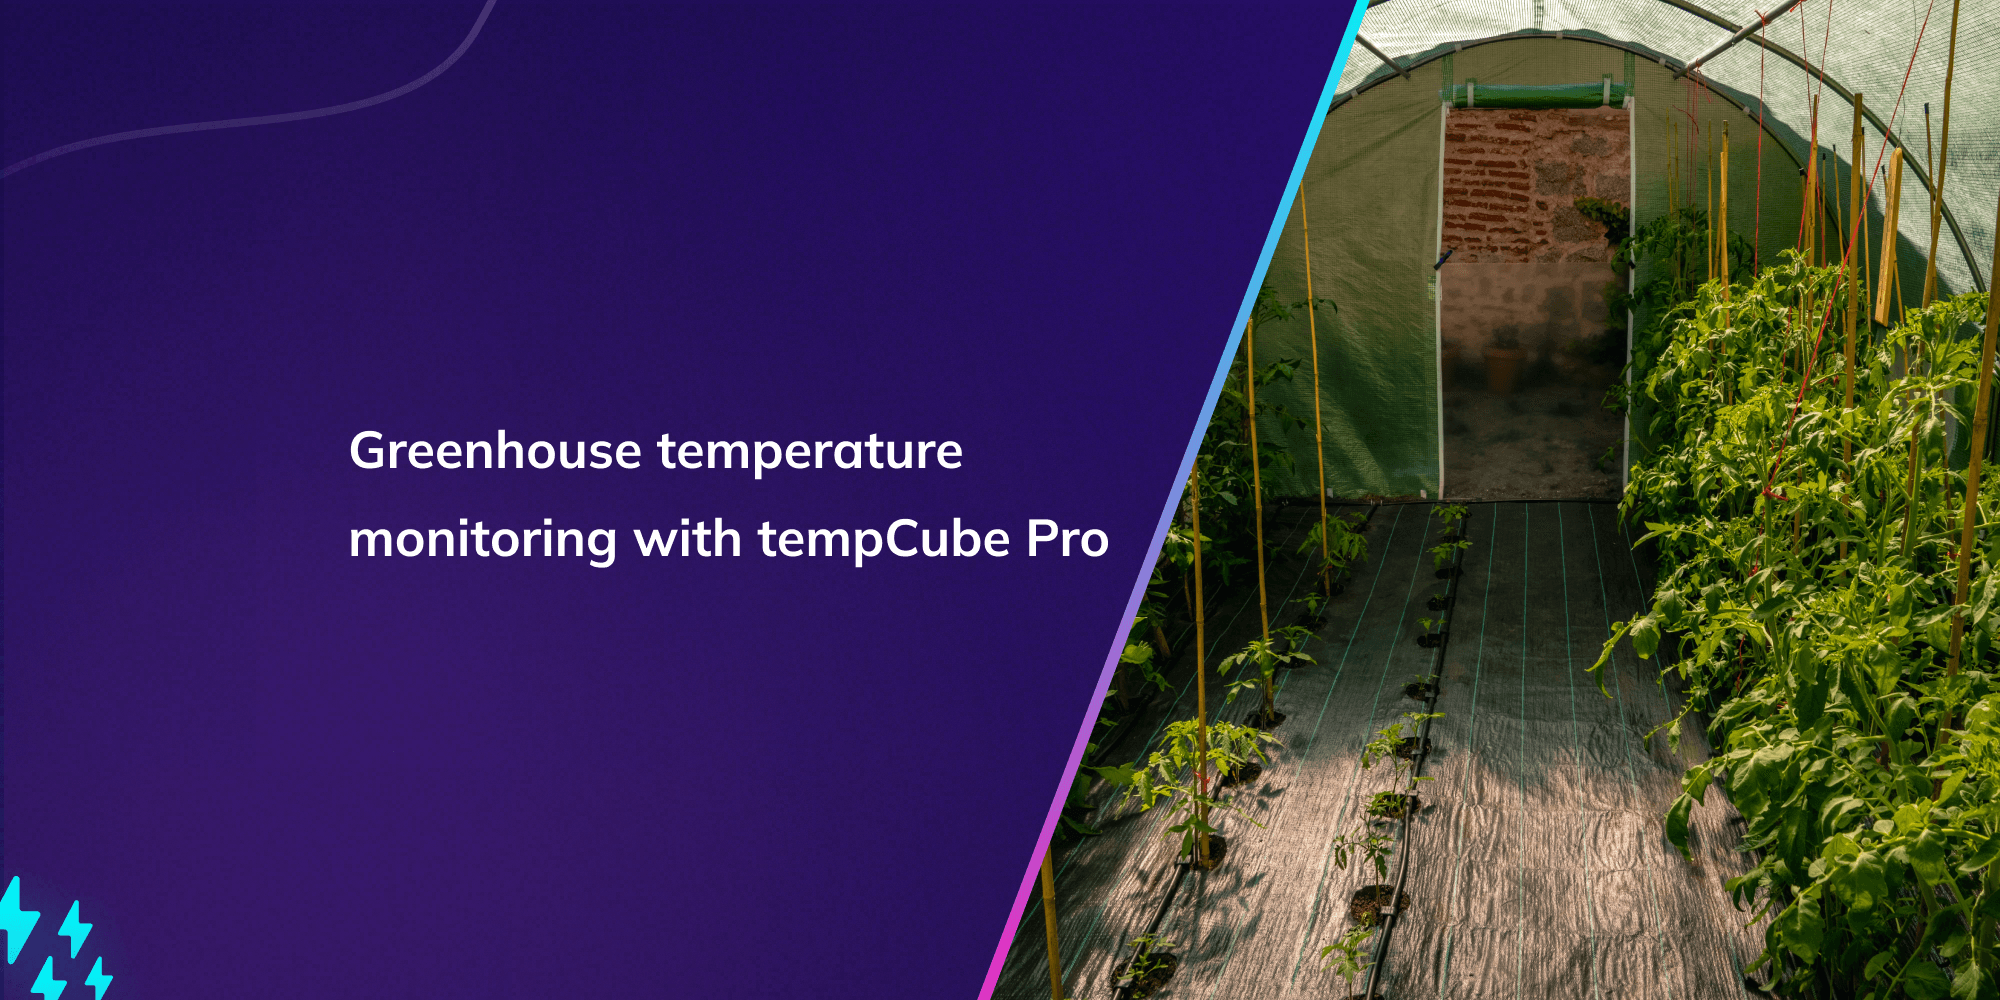 Greenhouse temperature monitoring with tempCube Pro